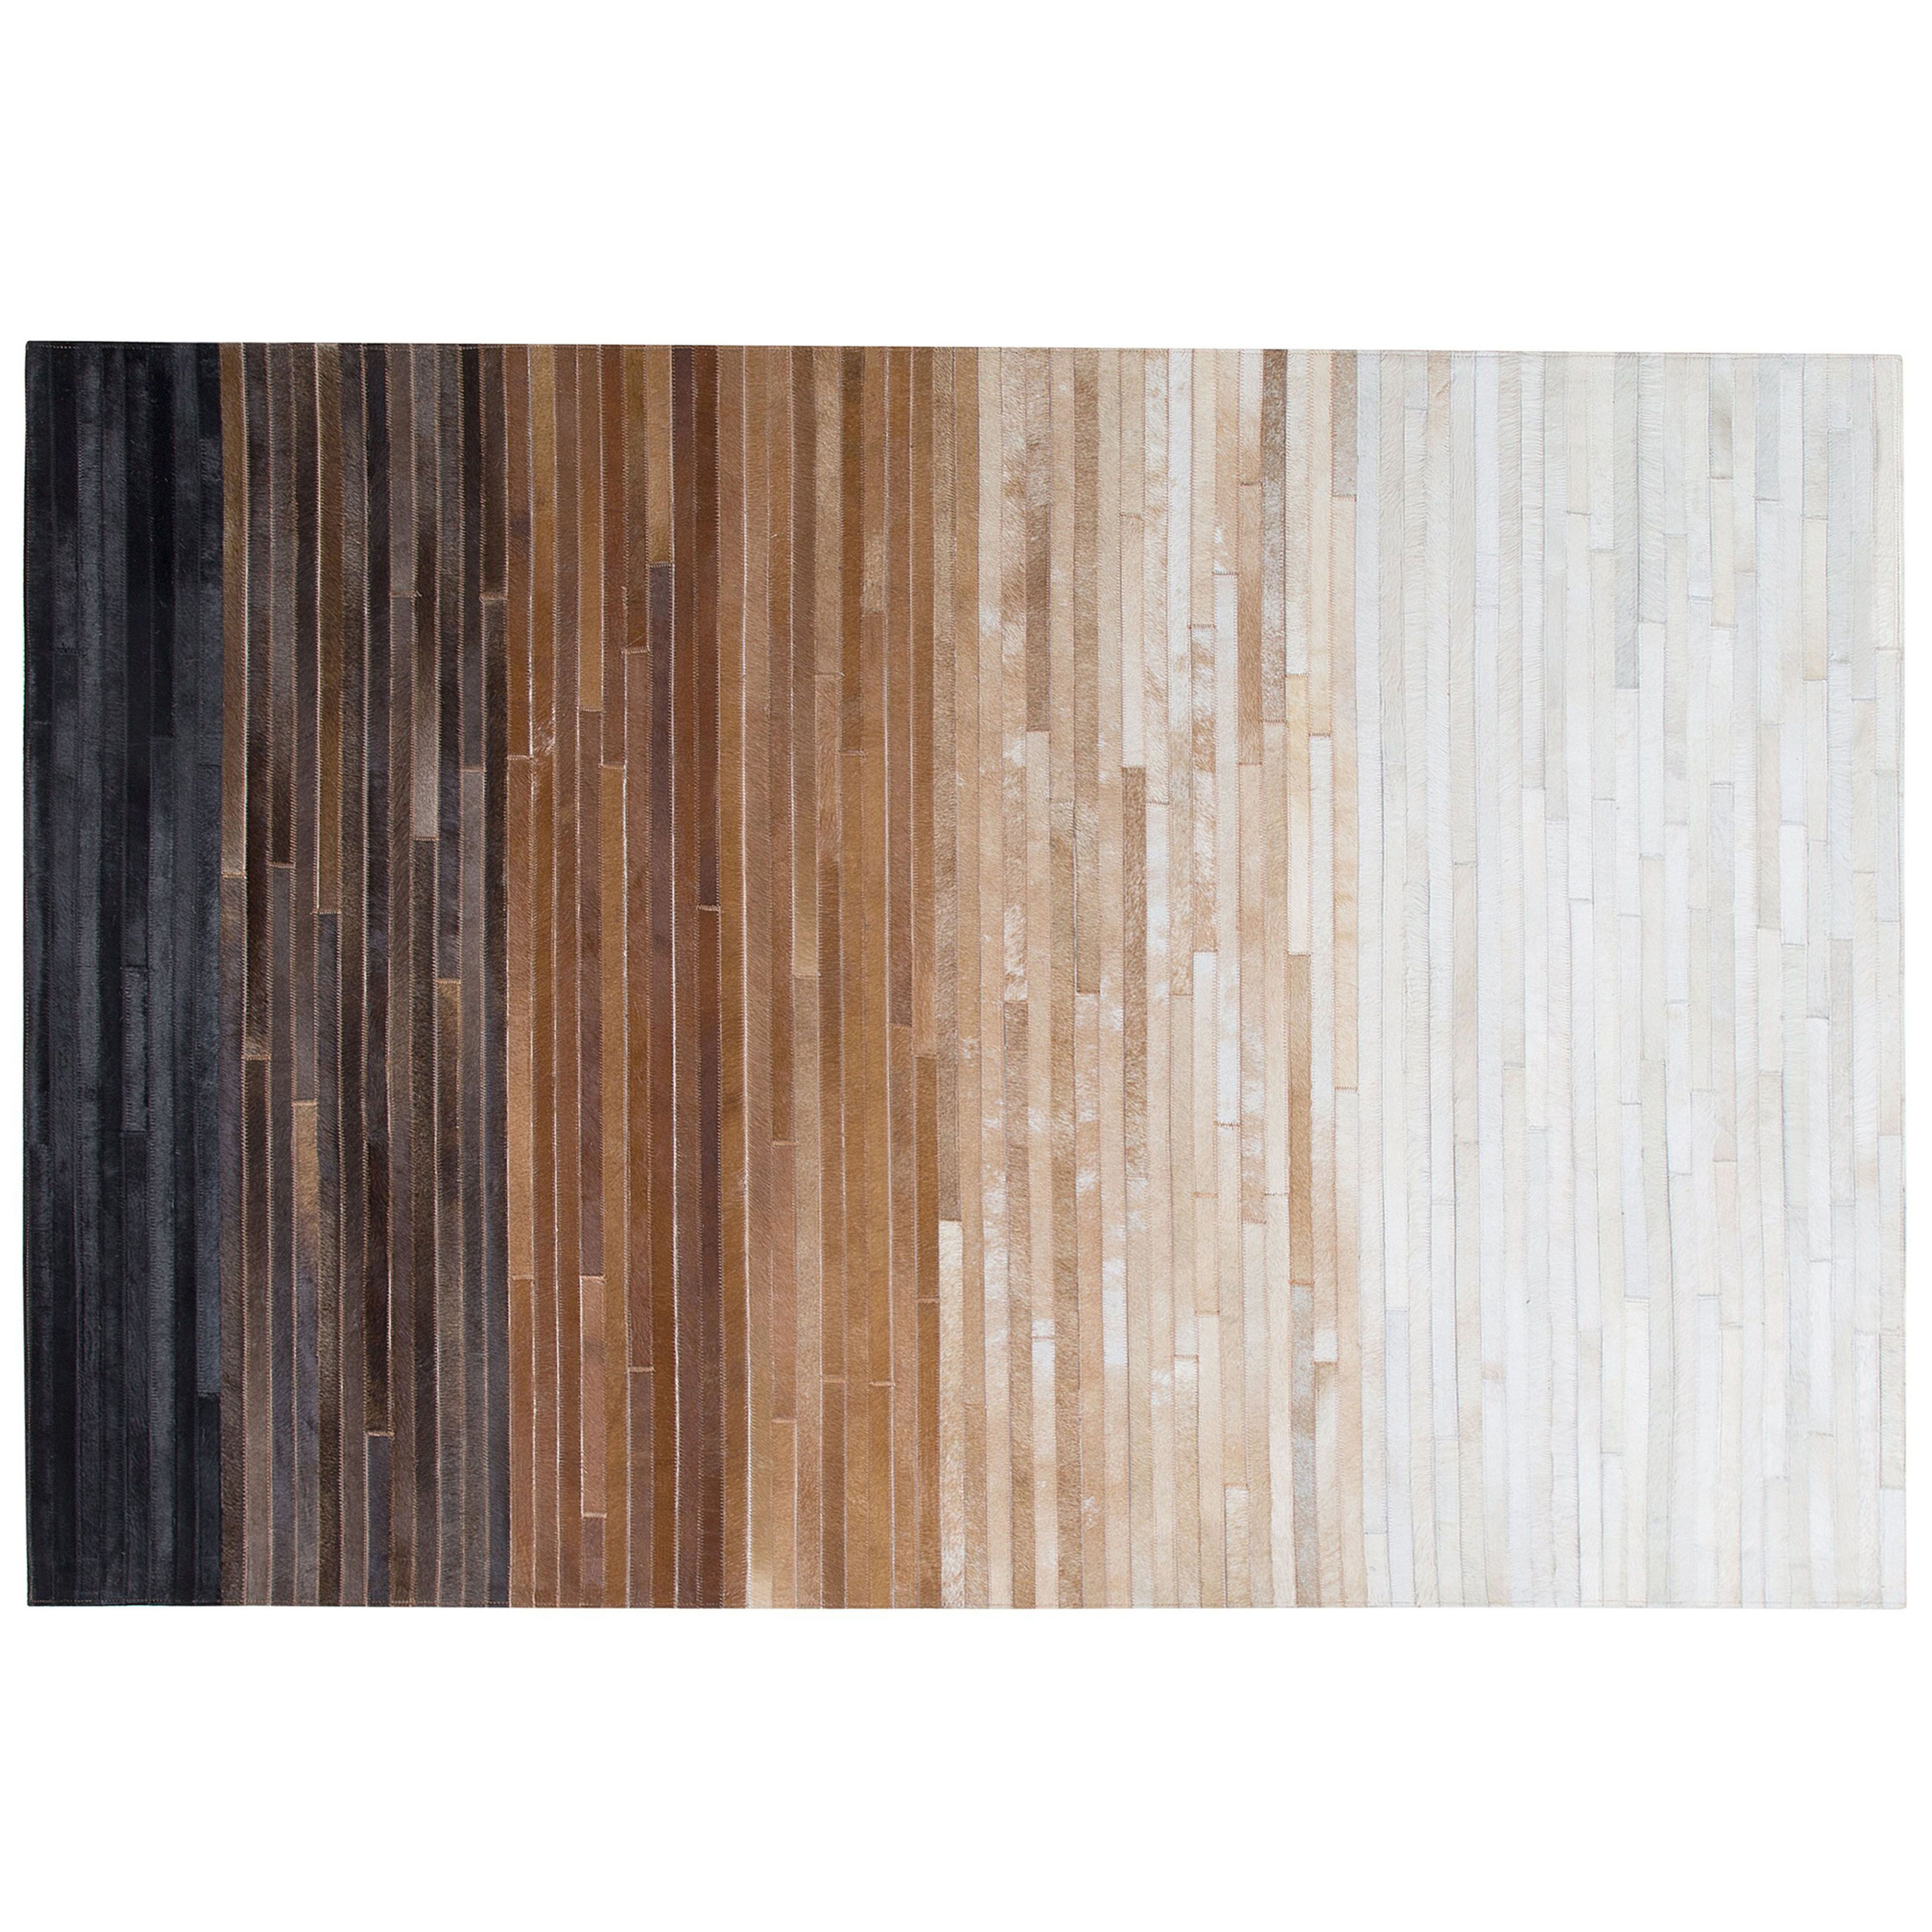 Beliani Rug Brown Beige Leather 160 x 230 cm Modern Patchwork Ombre Multicolour Handcrafted